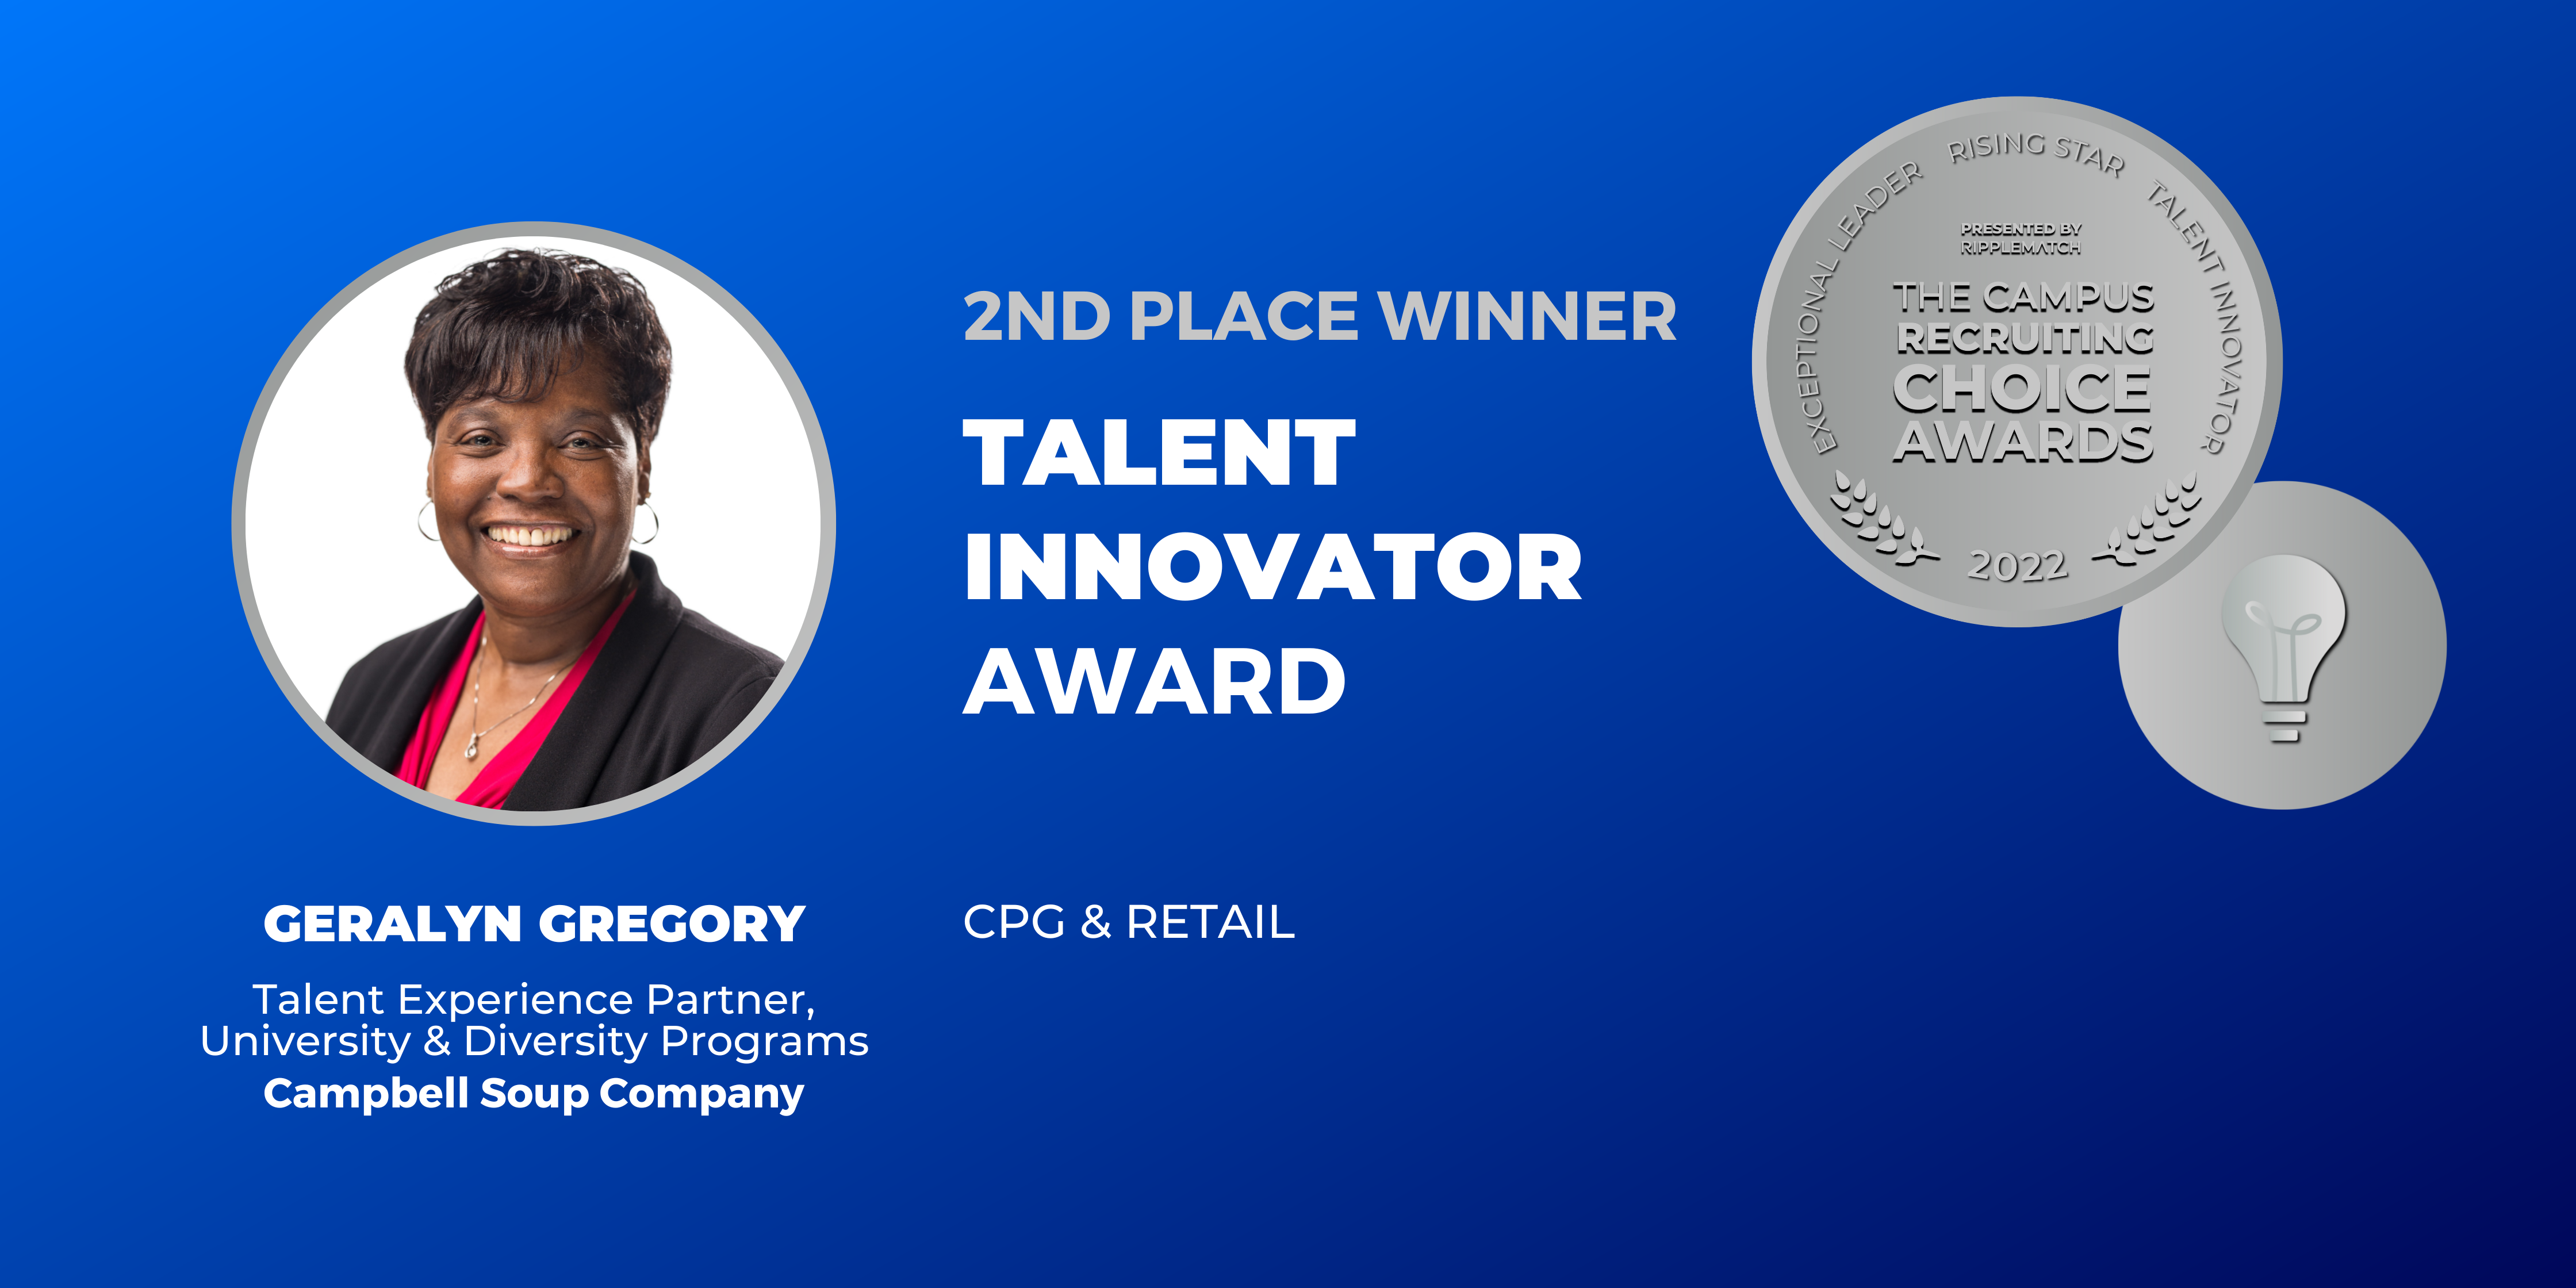 TALENT INNOVATOR - 2nd place - CPG & Retail - Geralyn Gregory